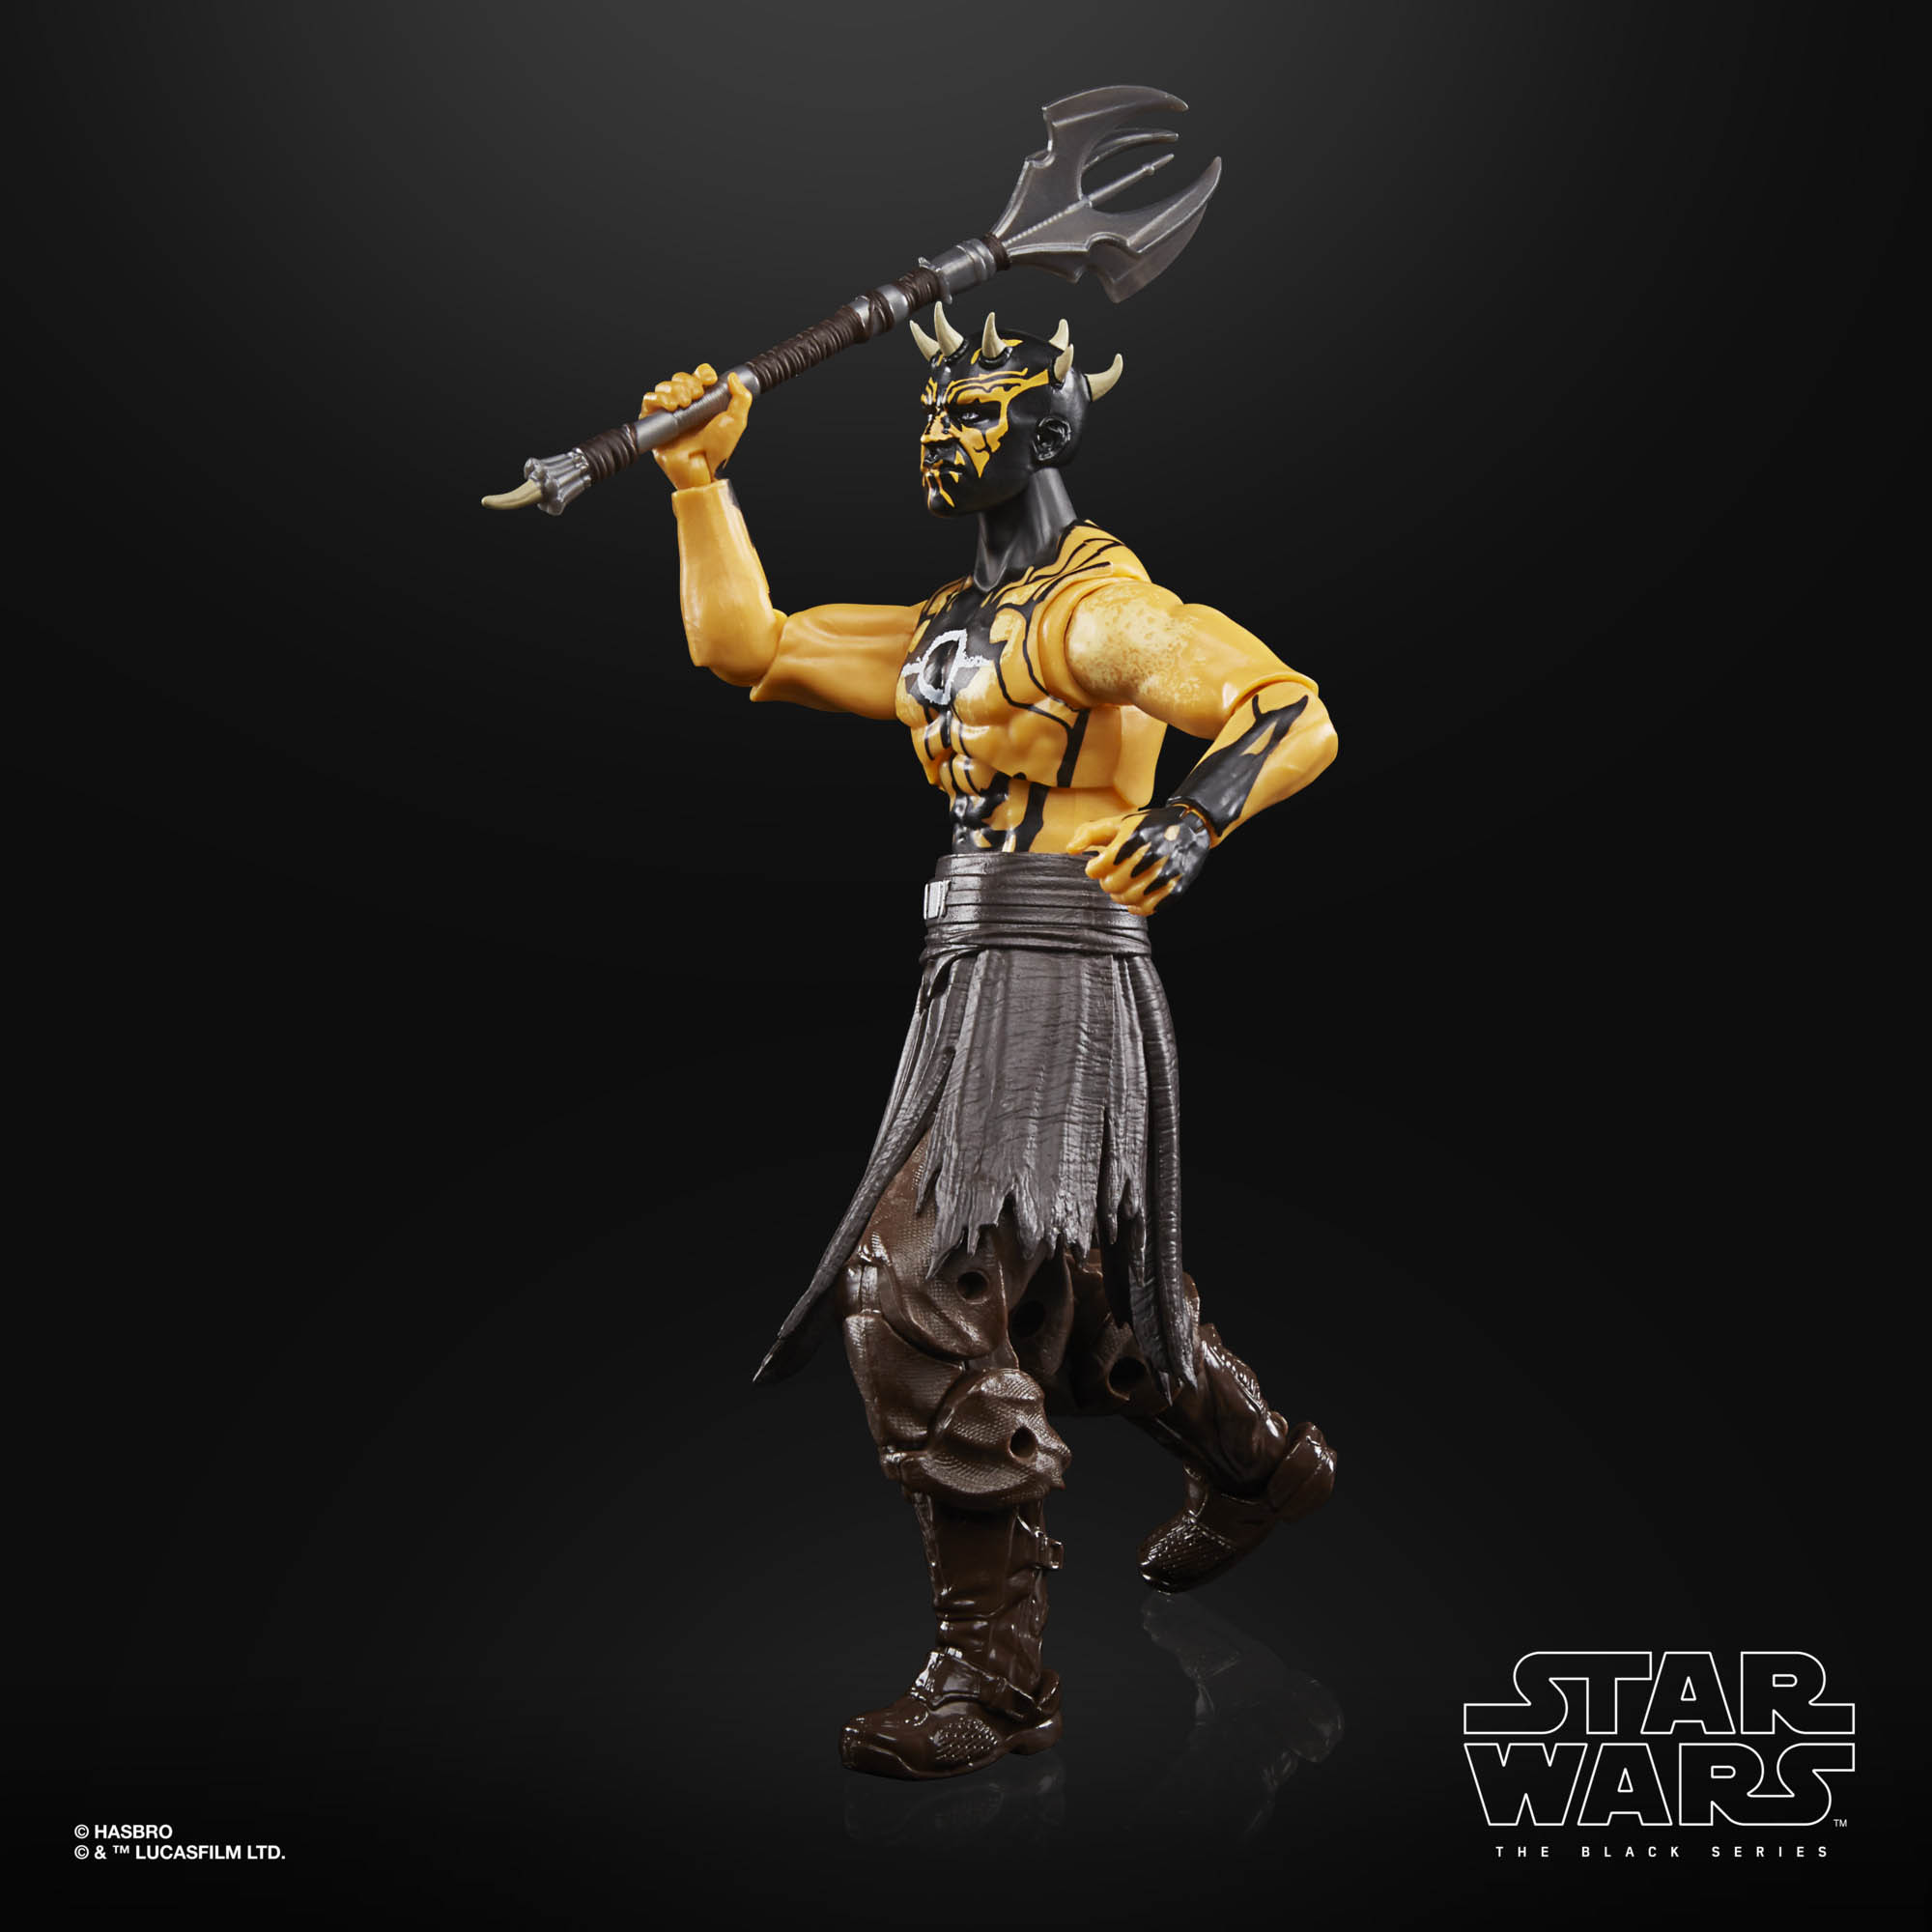 Star Wars The Black Series Gaming Greats Nightbrother Warrior F2867 5010993873838